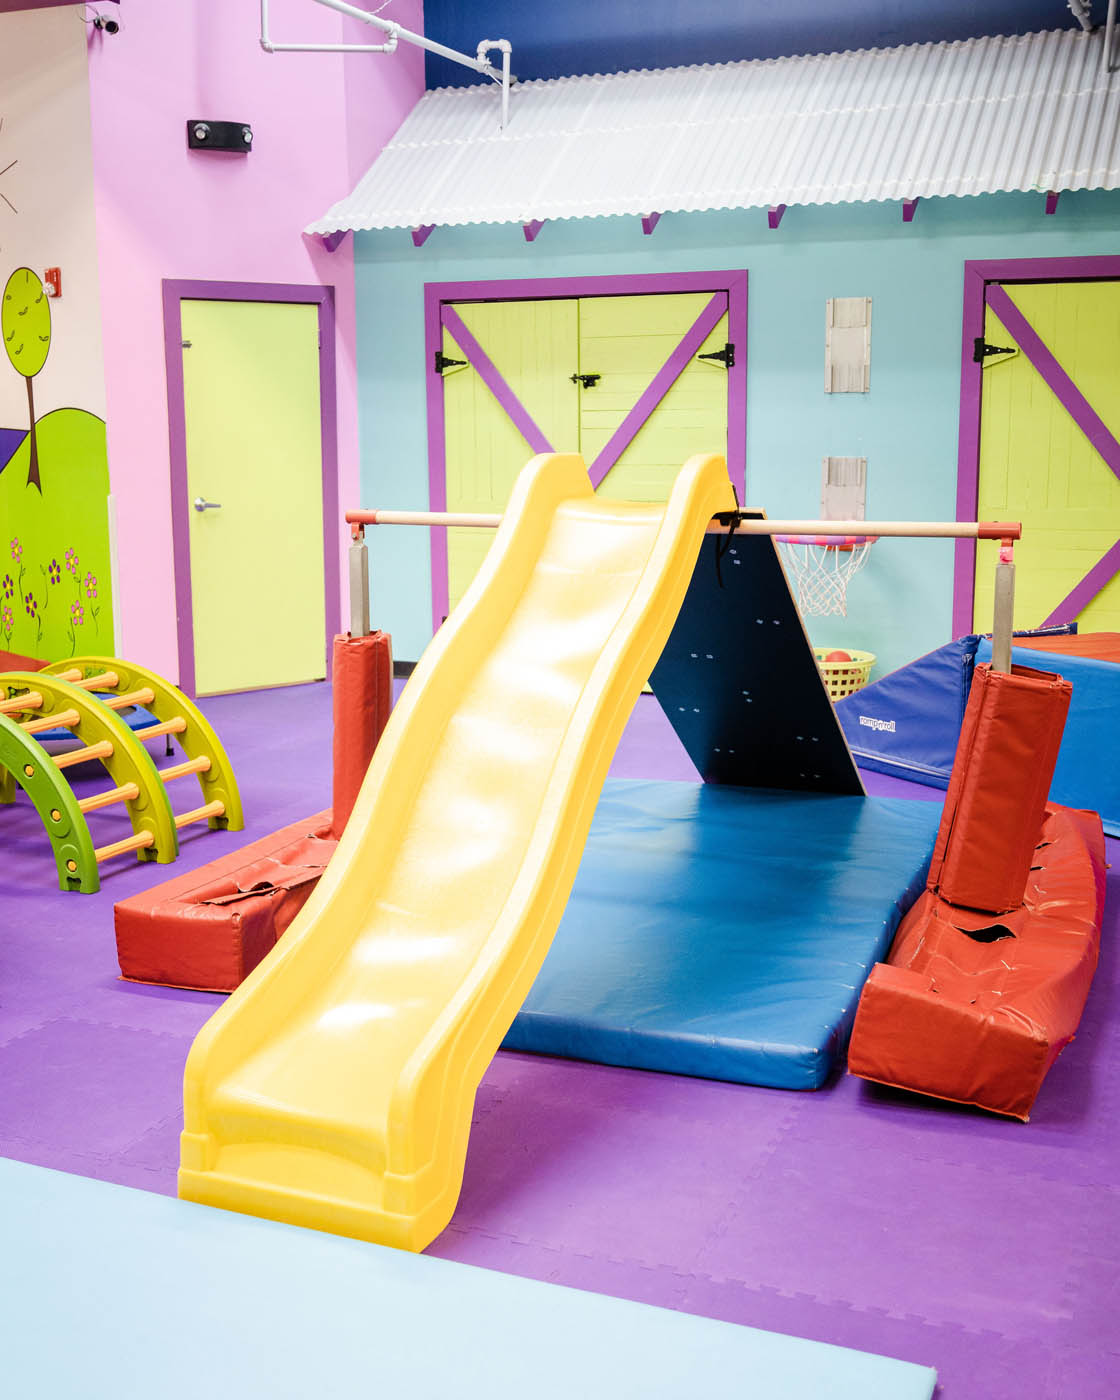 A Romp n' Roll North Raleigh slide, indoor playgrounds in Raleigh, NC.